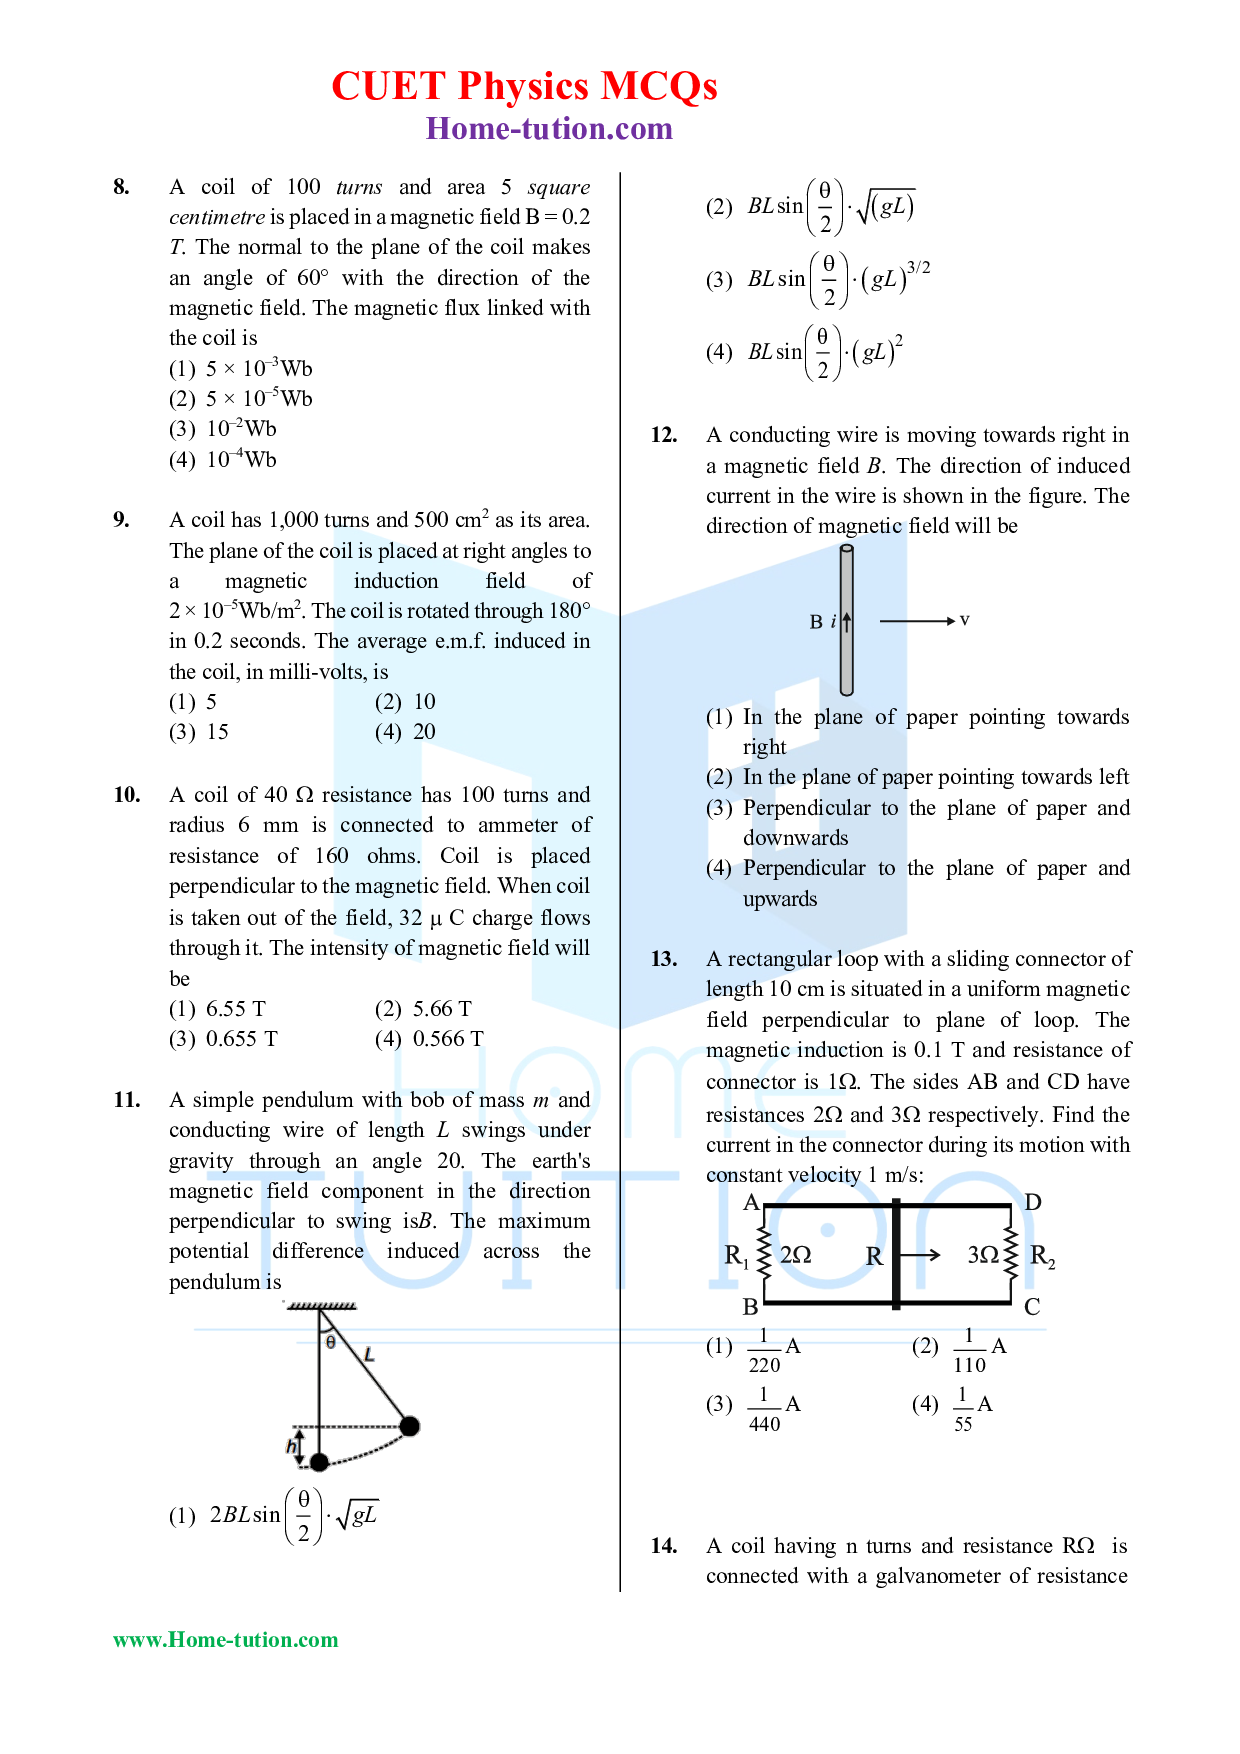 CUET MCQ Questions For Physics Chapter-06 Electromagnetic Induction